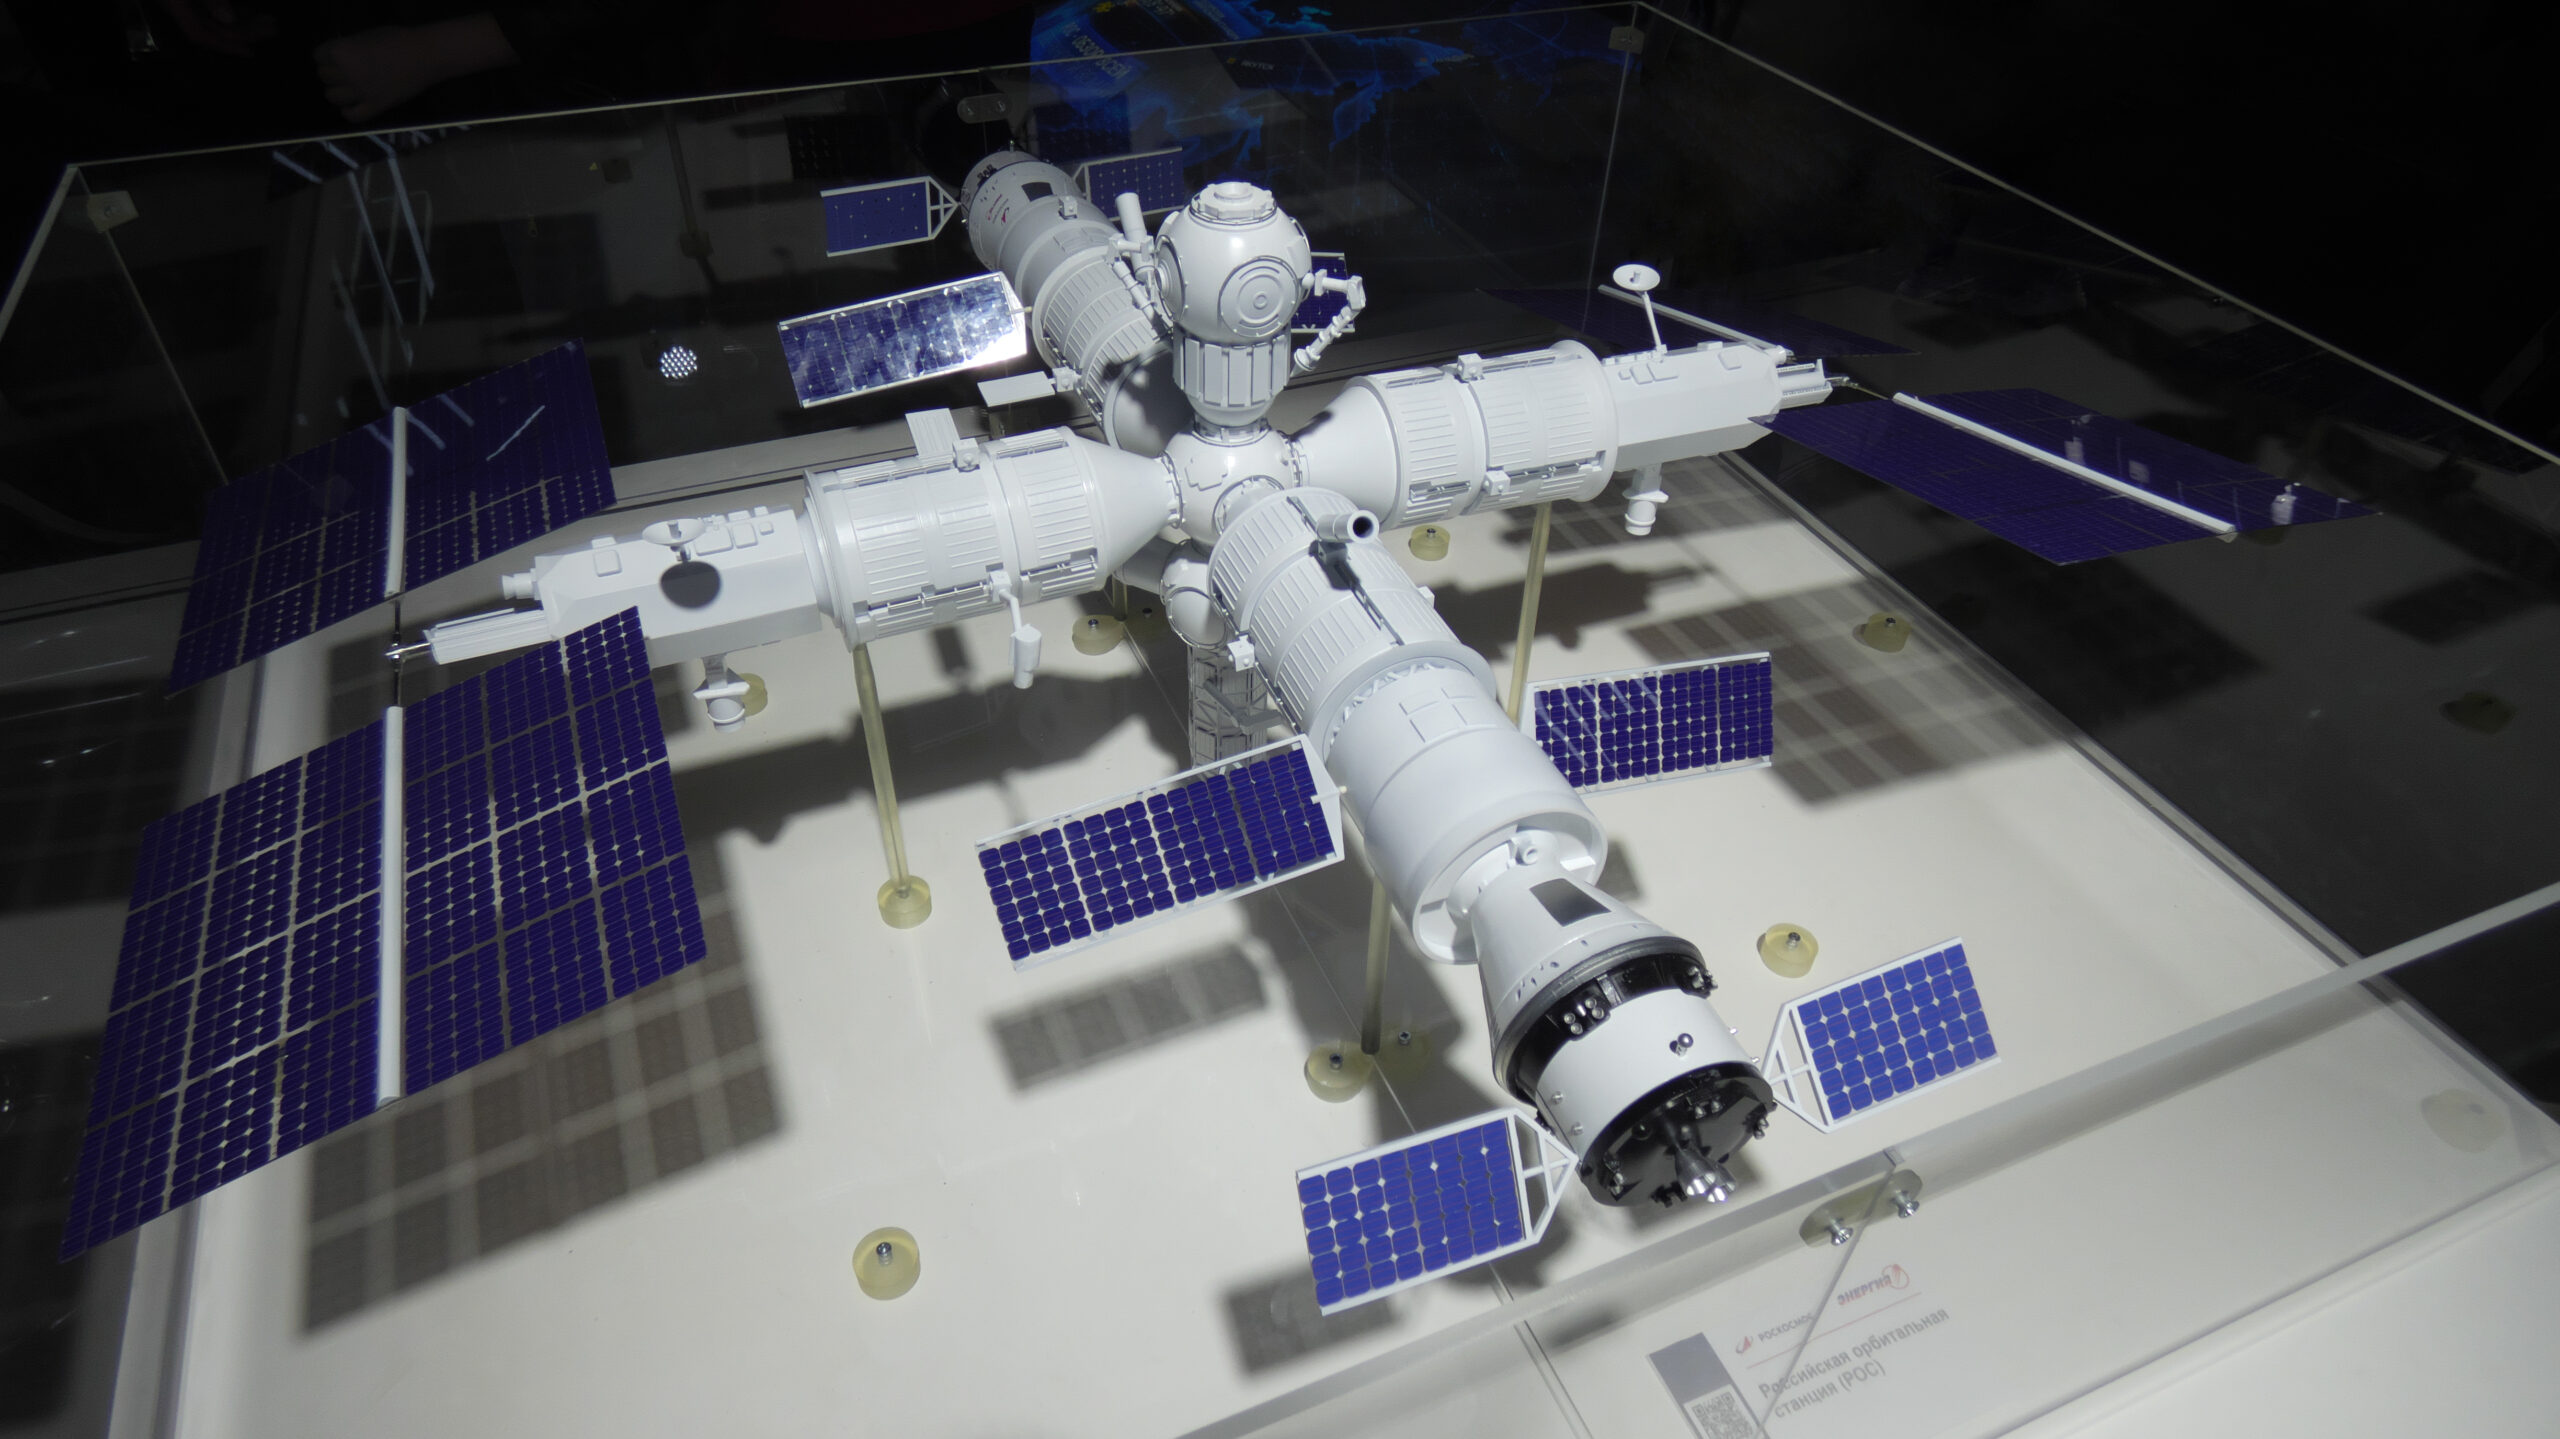 Russian Orbital Service Station layout during the Armiya 2022 exhibition scaled